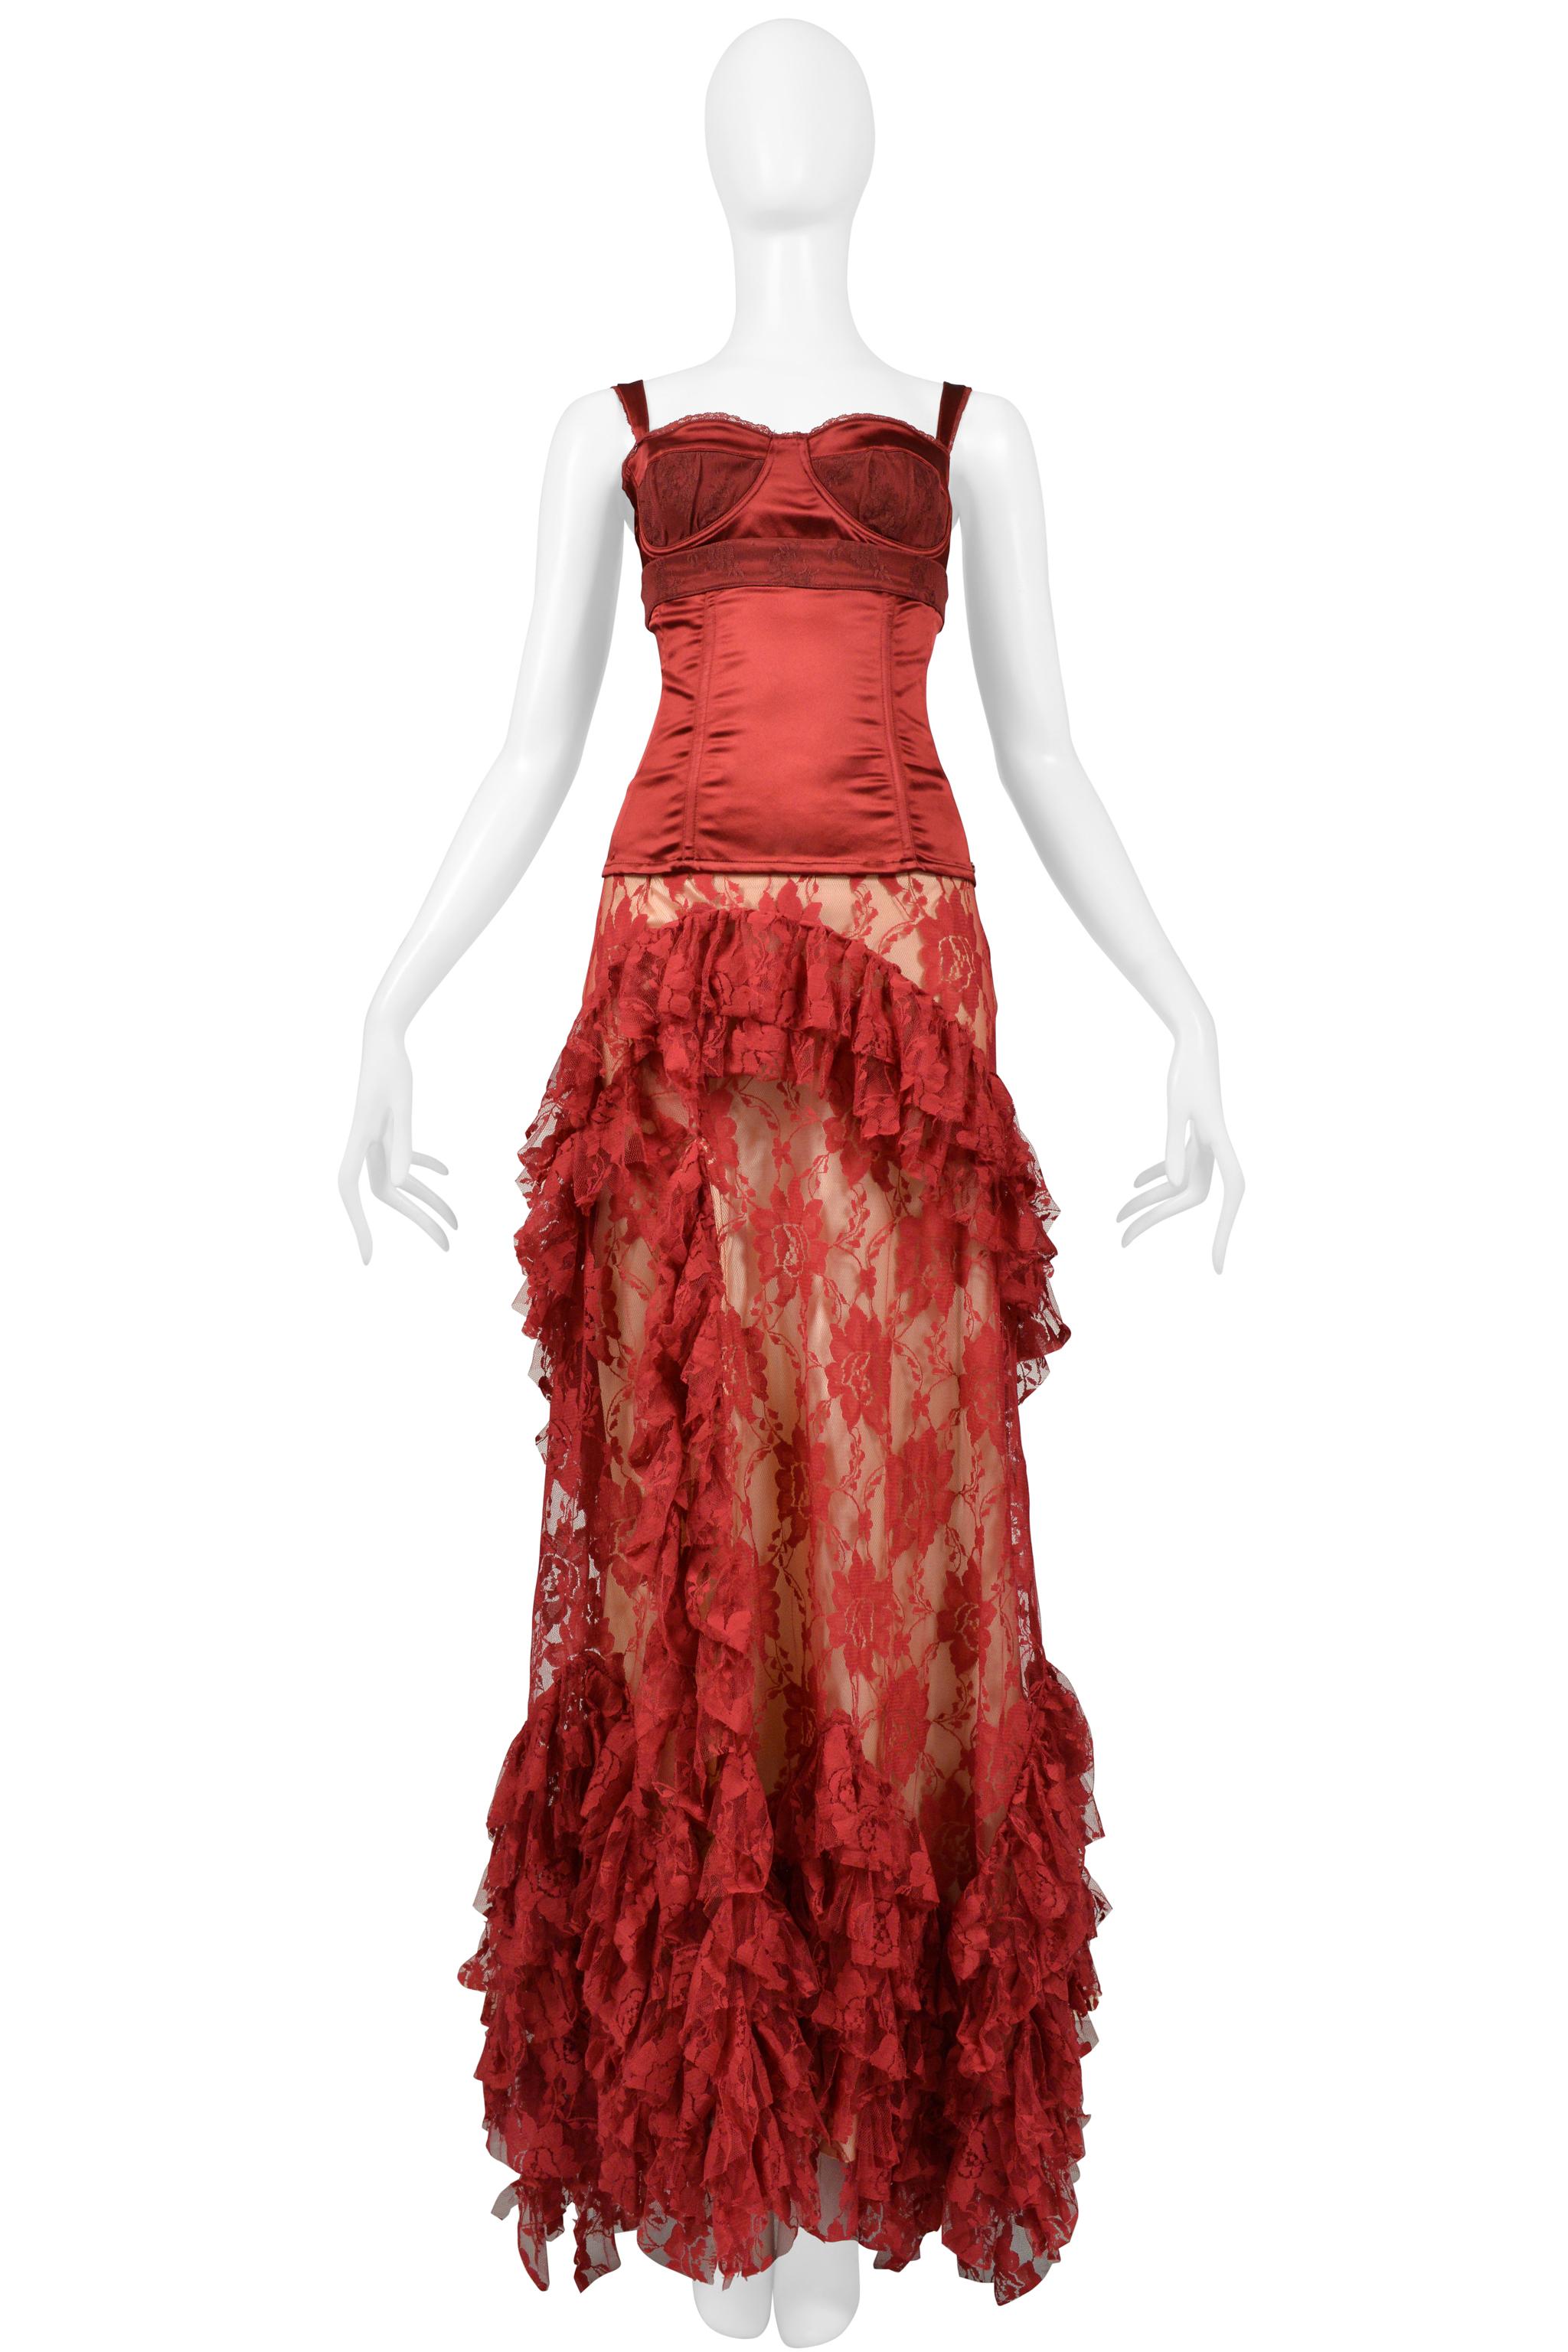 John Galliano Burgundy Lace Ballgown Skirt & Corset Top In Good Condition For Sale In Los Angeles, CA